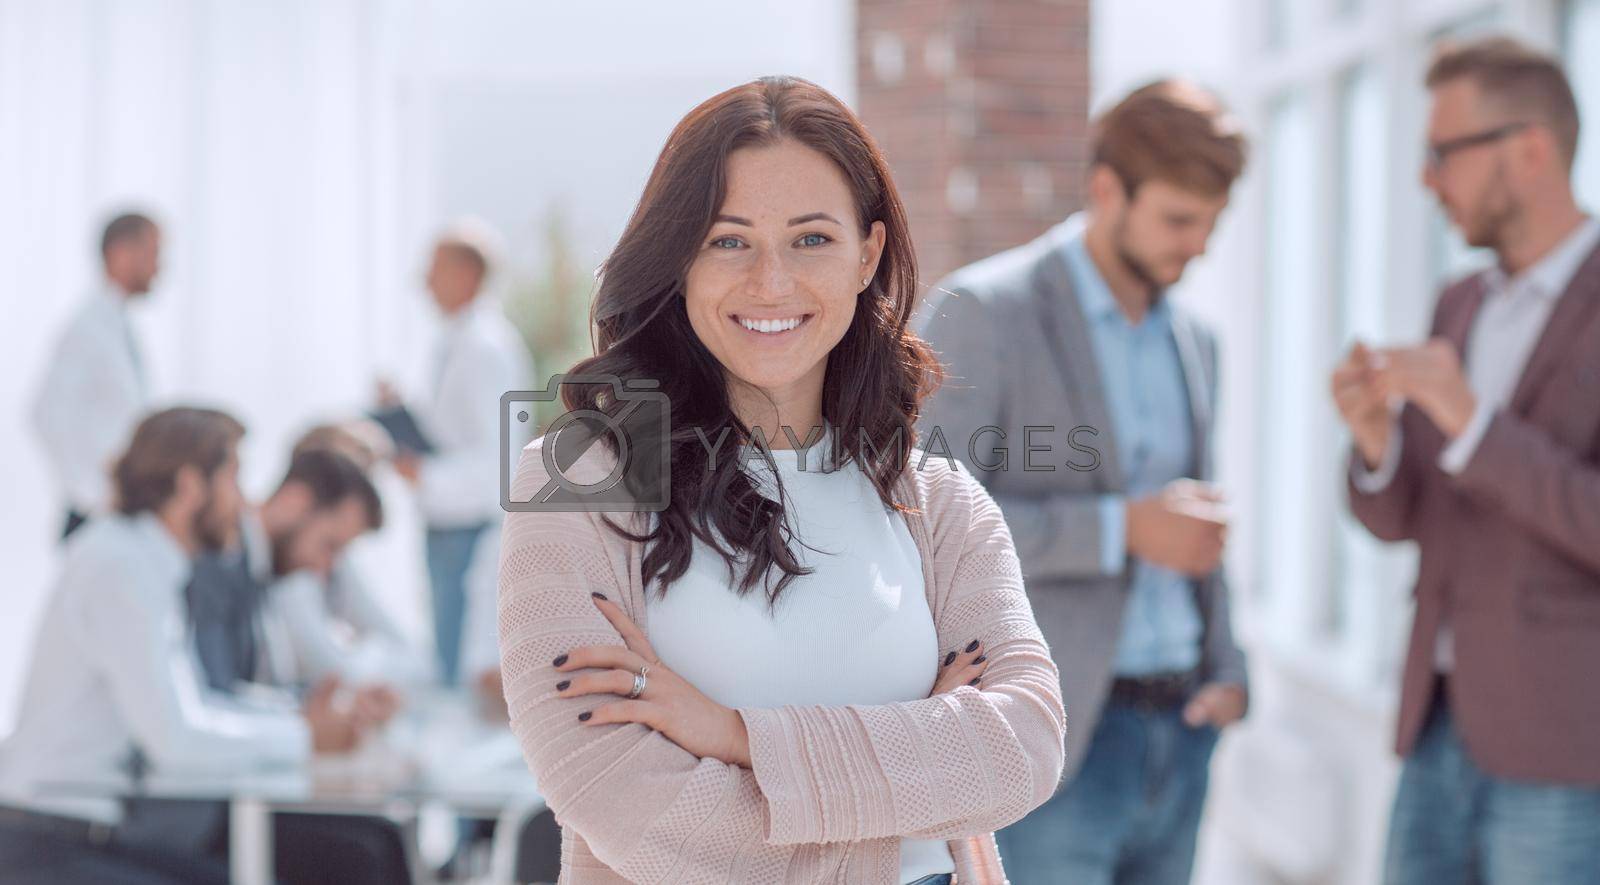 Royalty free image of Executive young woman standing in modern office. by asdf